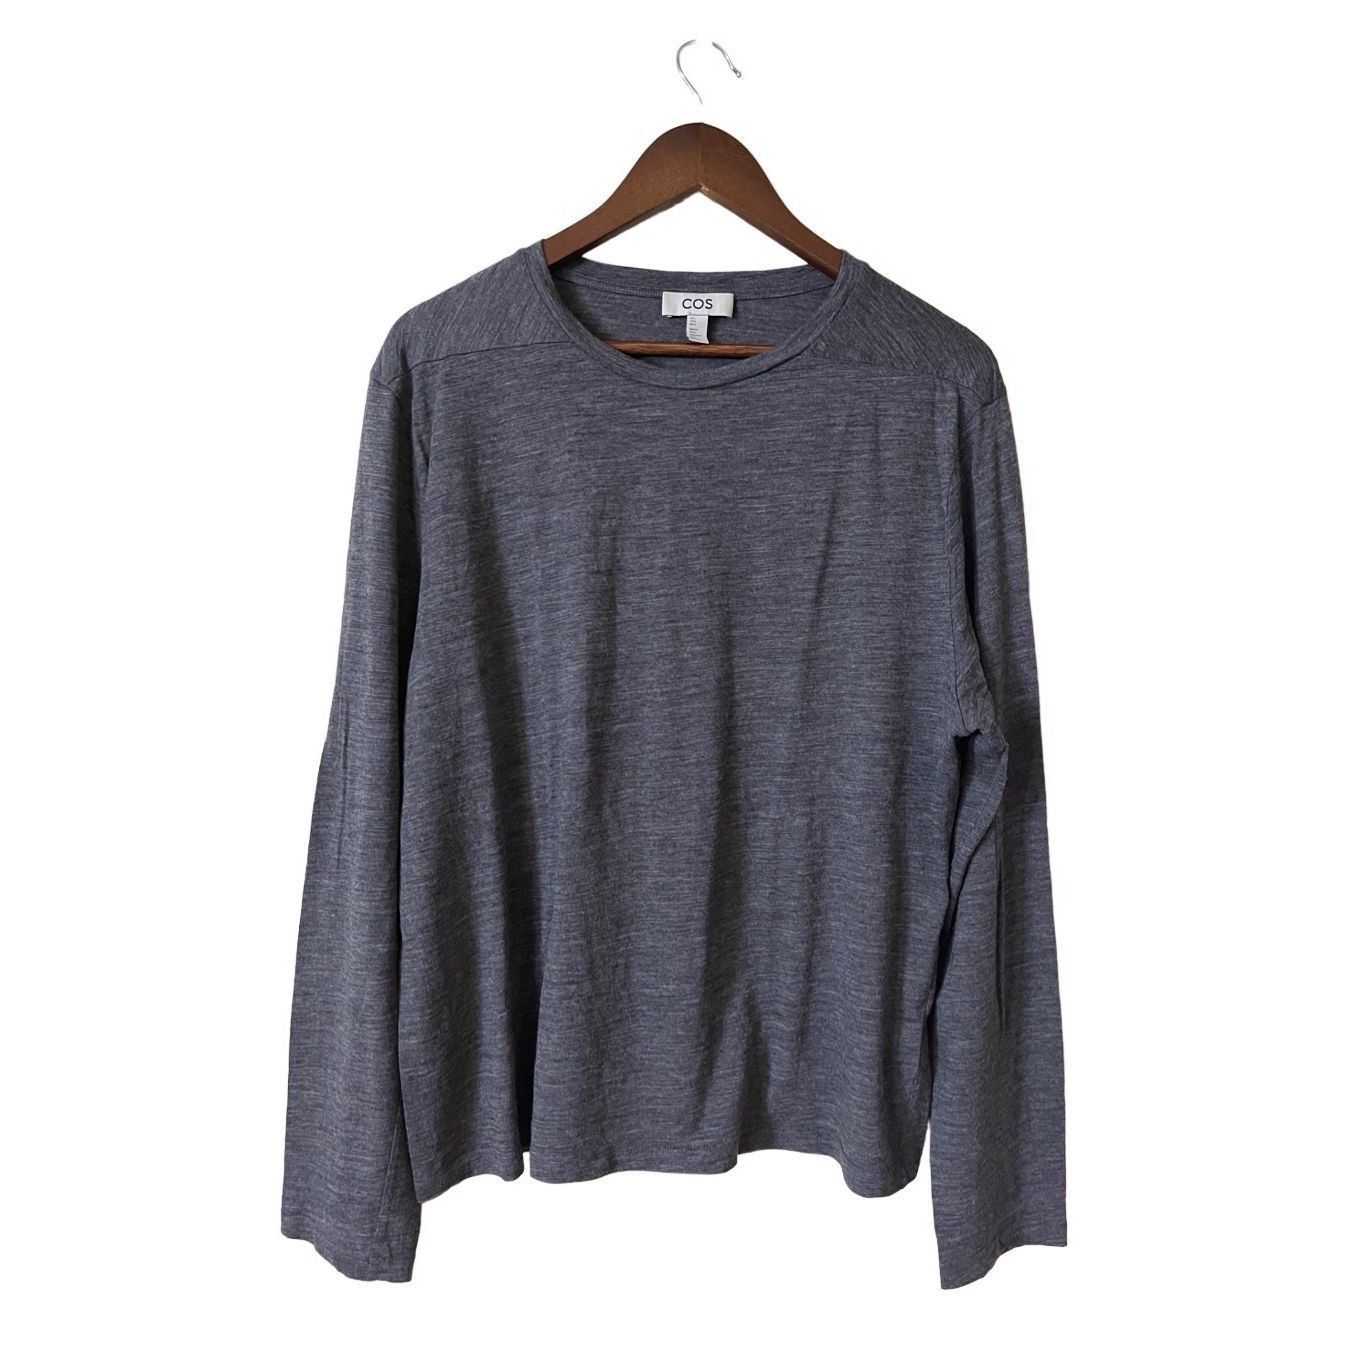 Cos COS 100% Wool Grey Crewneck Long Sleeve Lightweight Sweater Size US L / EU 52-54 / 3 - 1 Preview